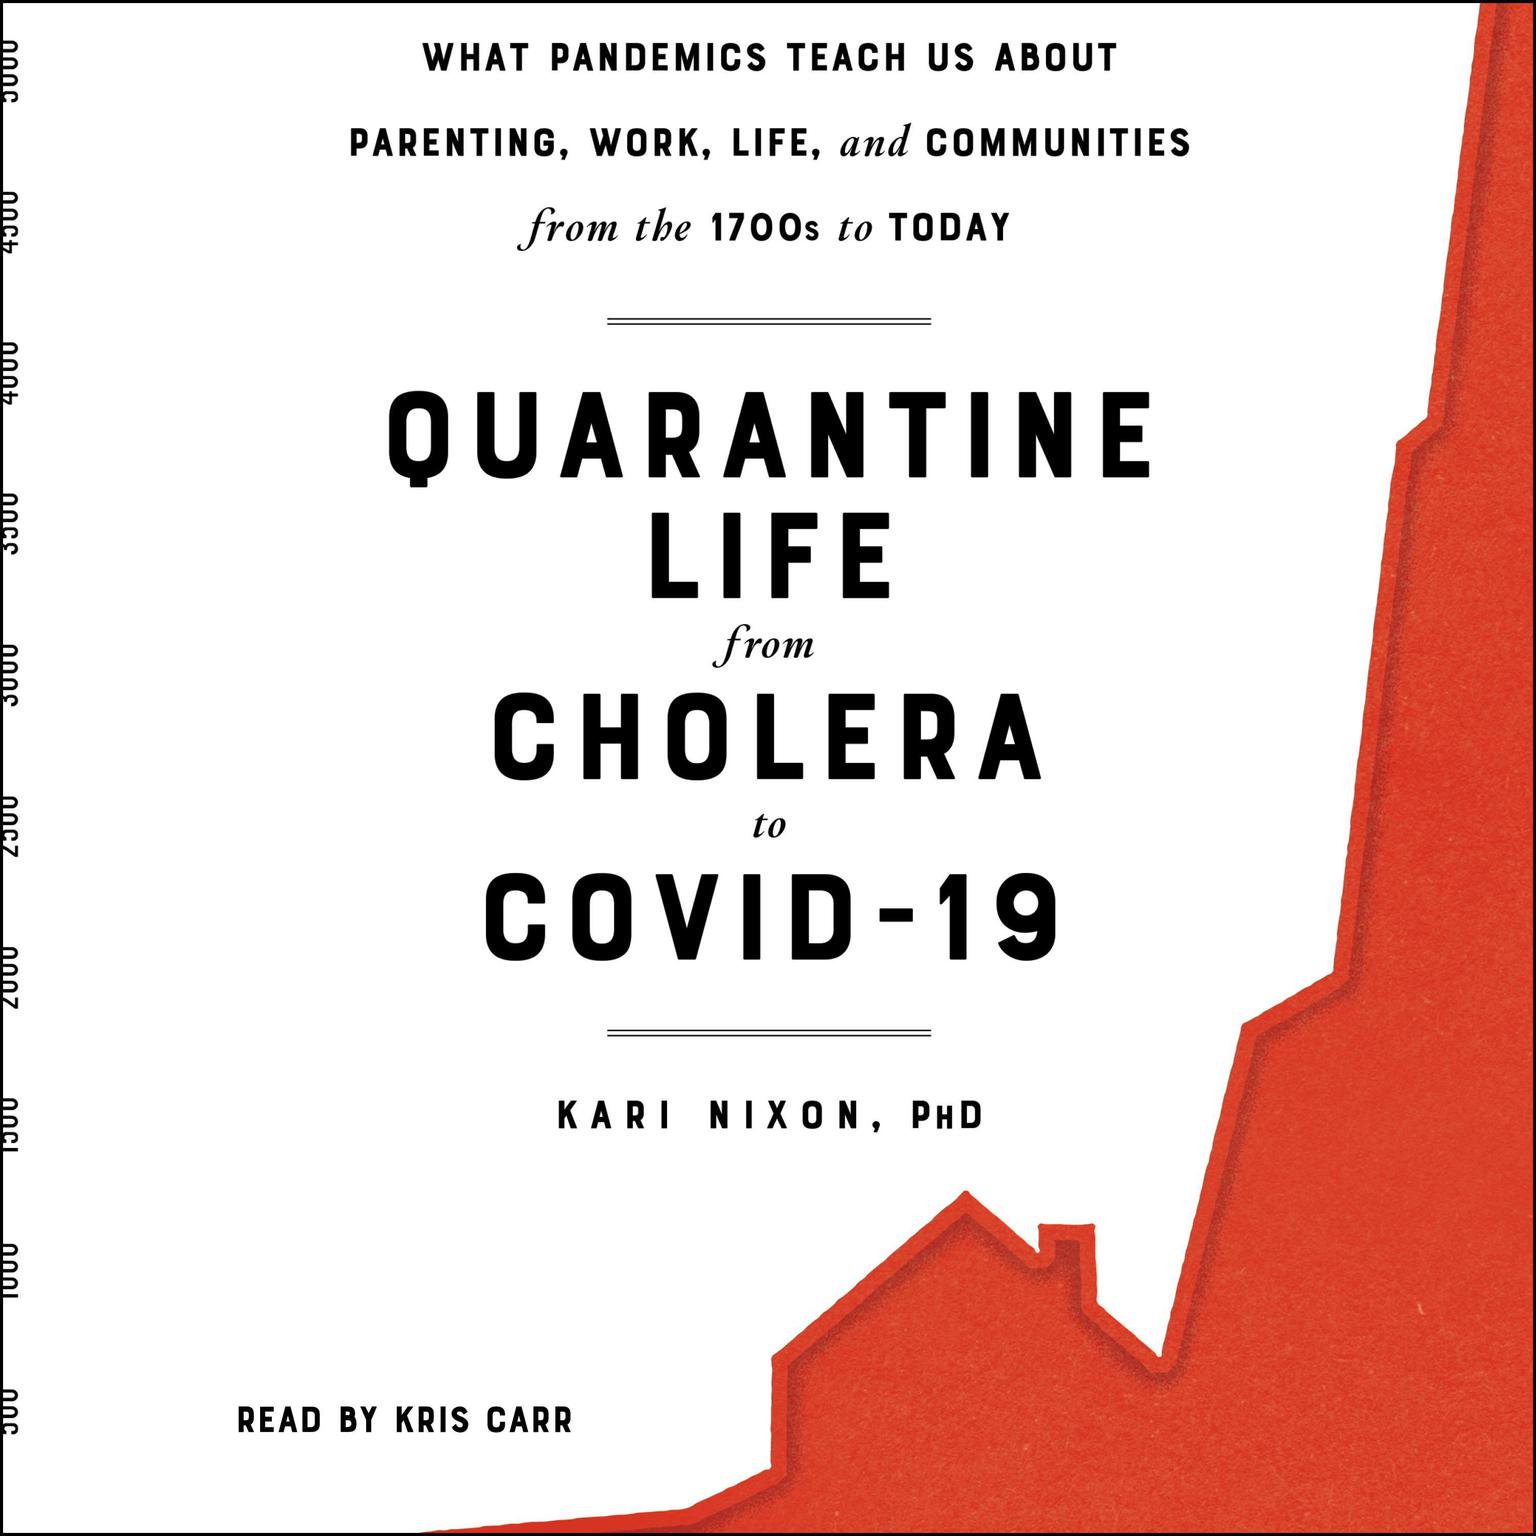 Quarantine Life from Cholera to COVID-19: What Pandemics Teach Us About Parenting, Work, Life, and Communities from the 1700s to Today Audiobook, by Kari Nixon